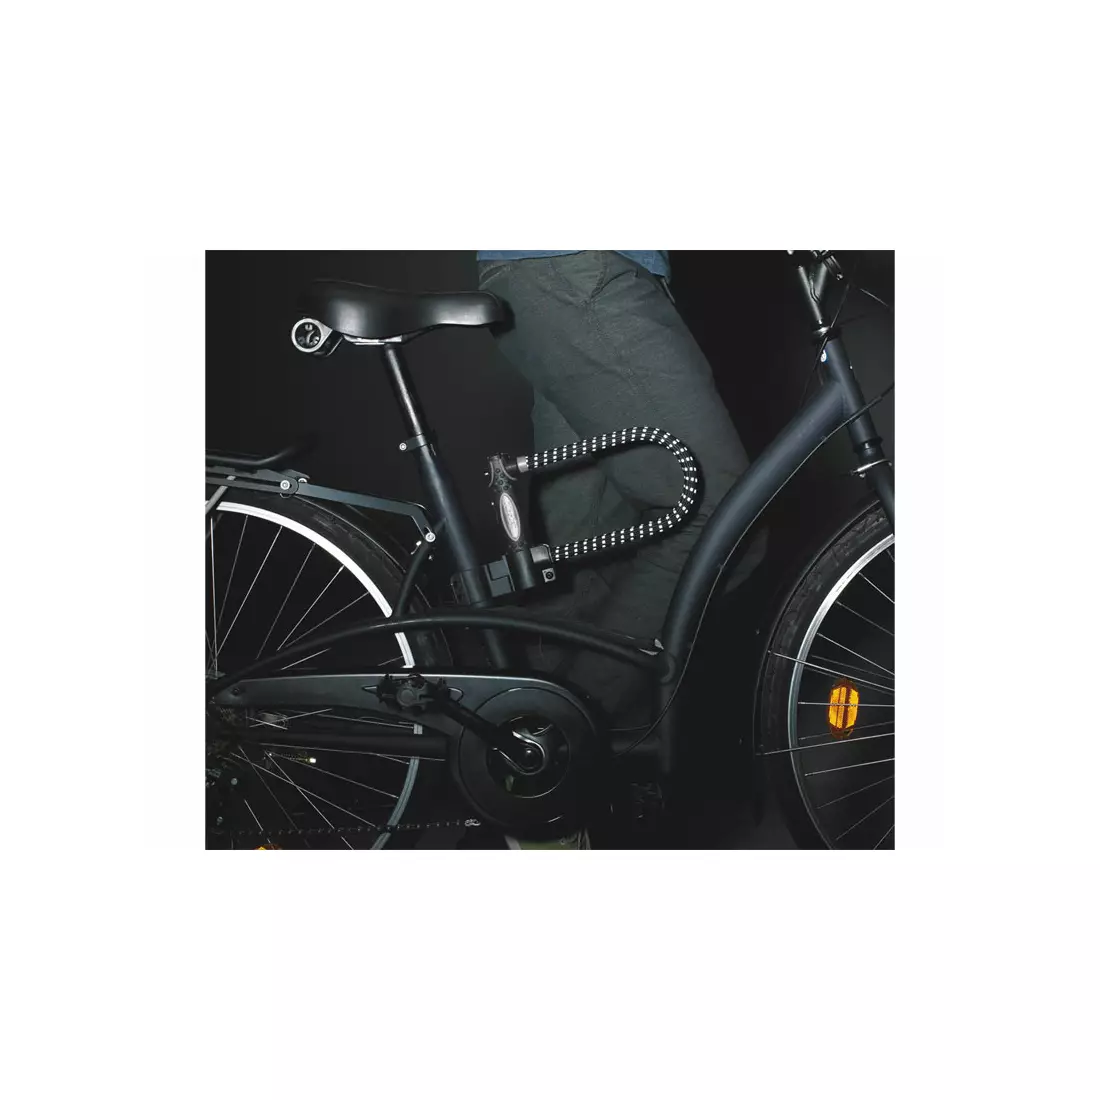 MASTERLOCK 8195LW U-LOCK bicycle lock 13mm 110mm 280mm KEY covered with rubber with reflection black MRL-8195EURDPROLWREF SS16